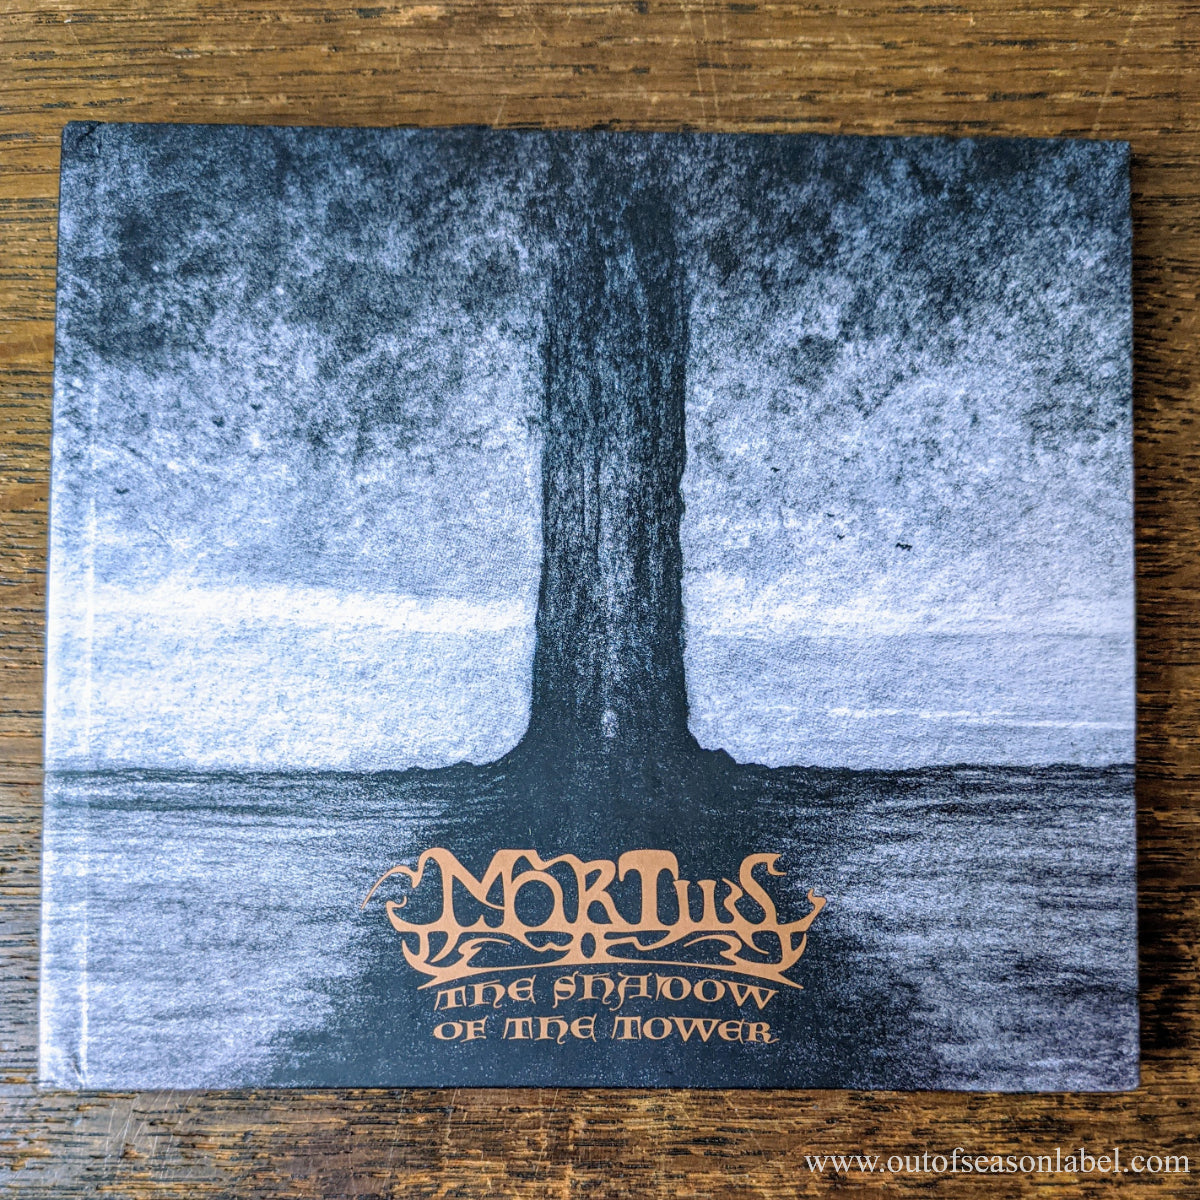 [SOLD OUT] MORTIIS "The Shadow of the Tower" CD [hardcover digibook, lim.666]